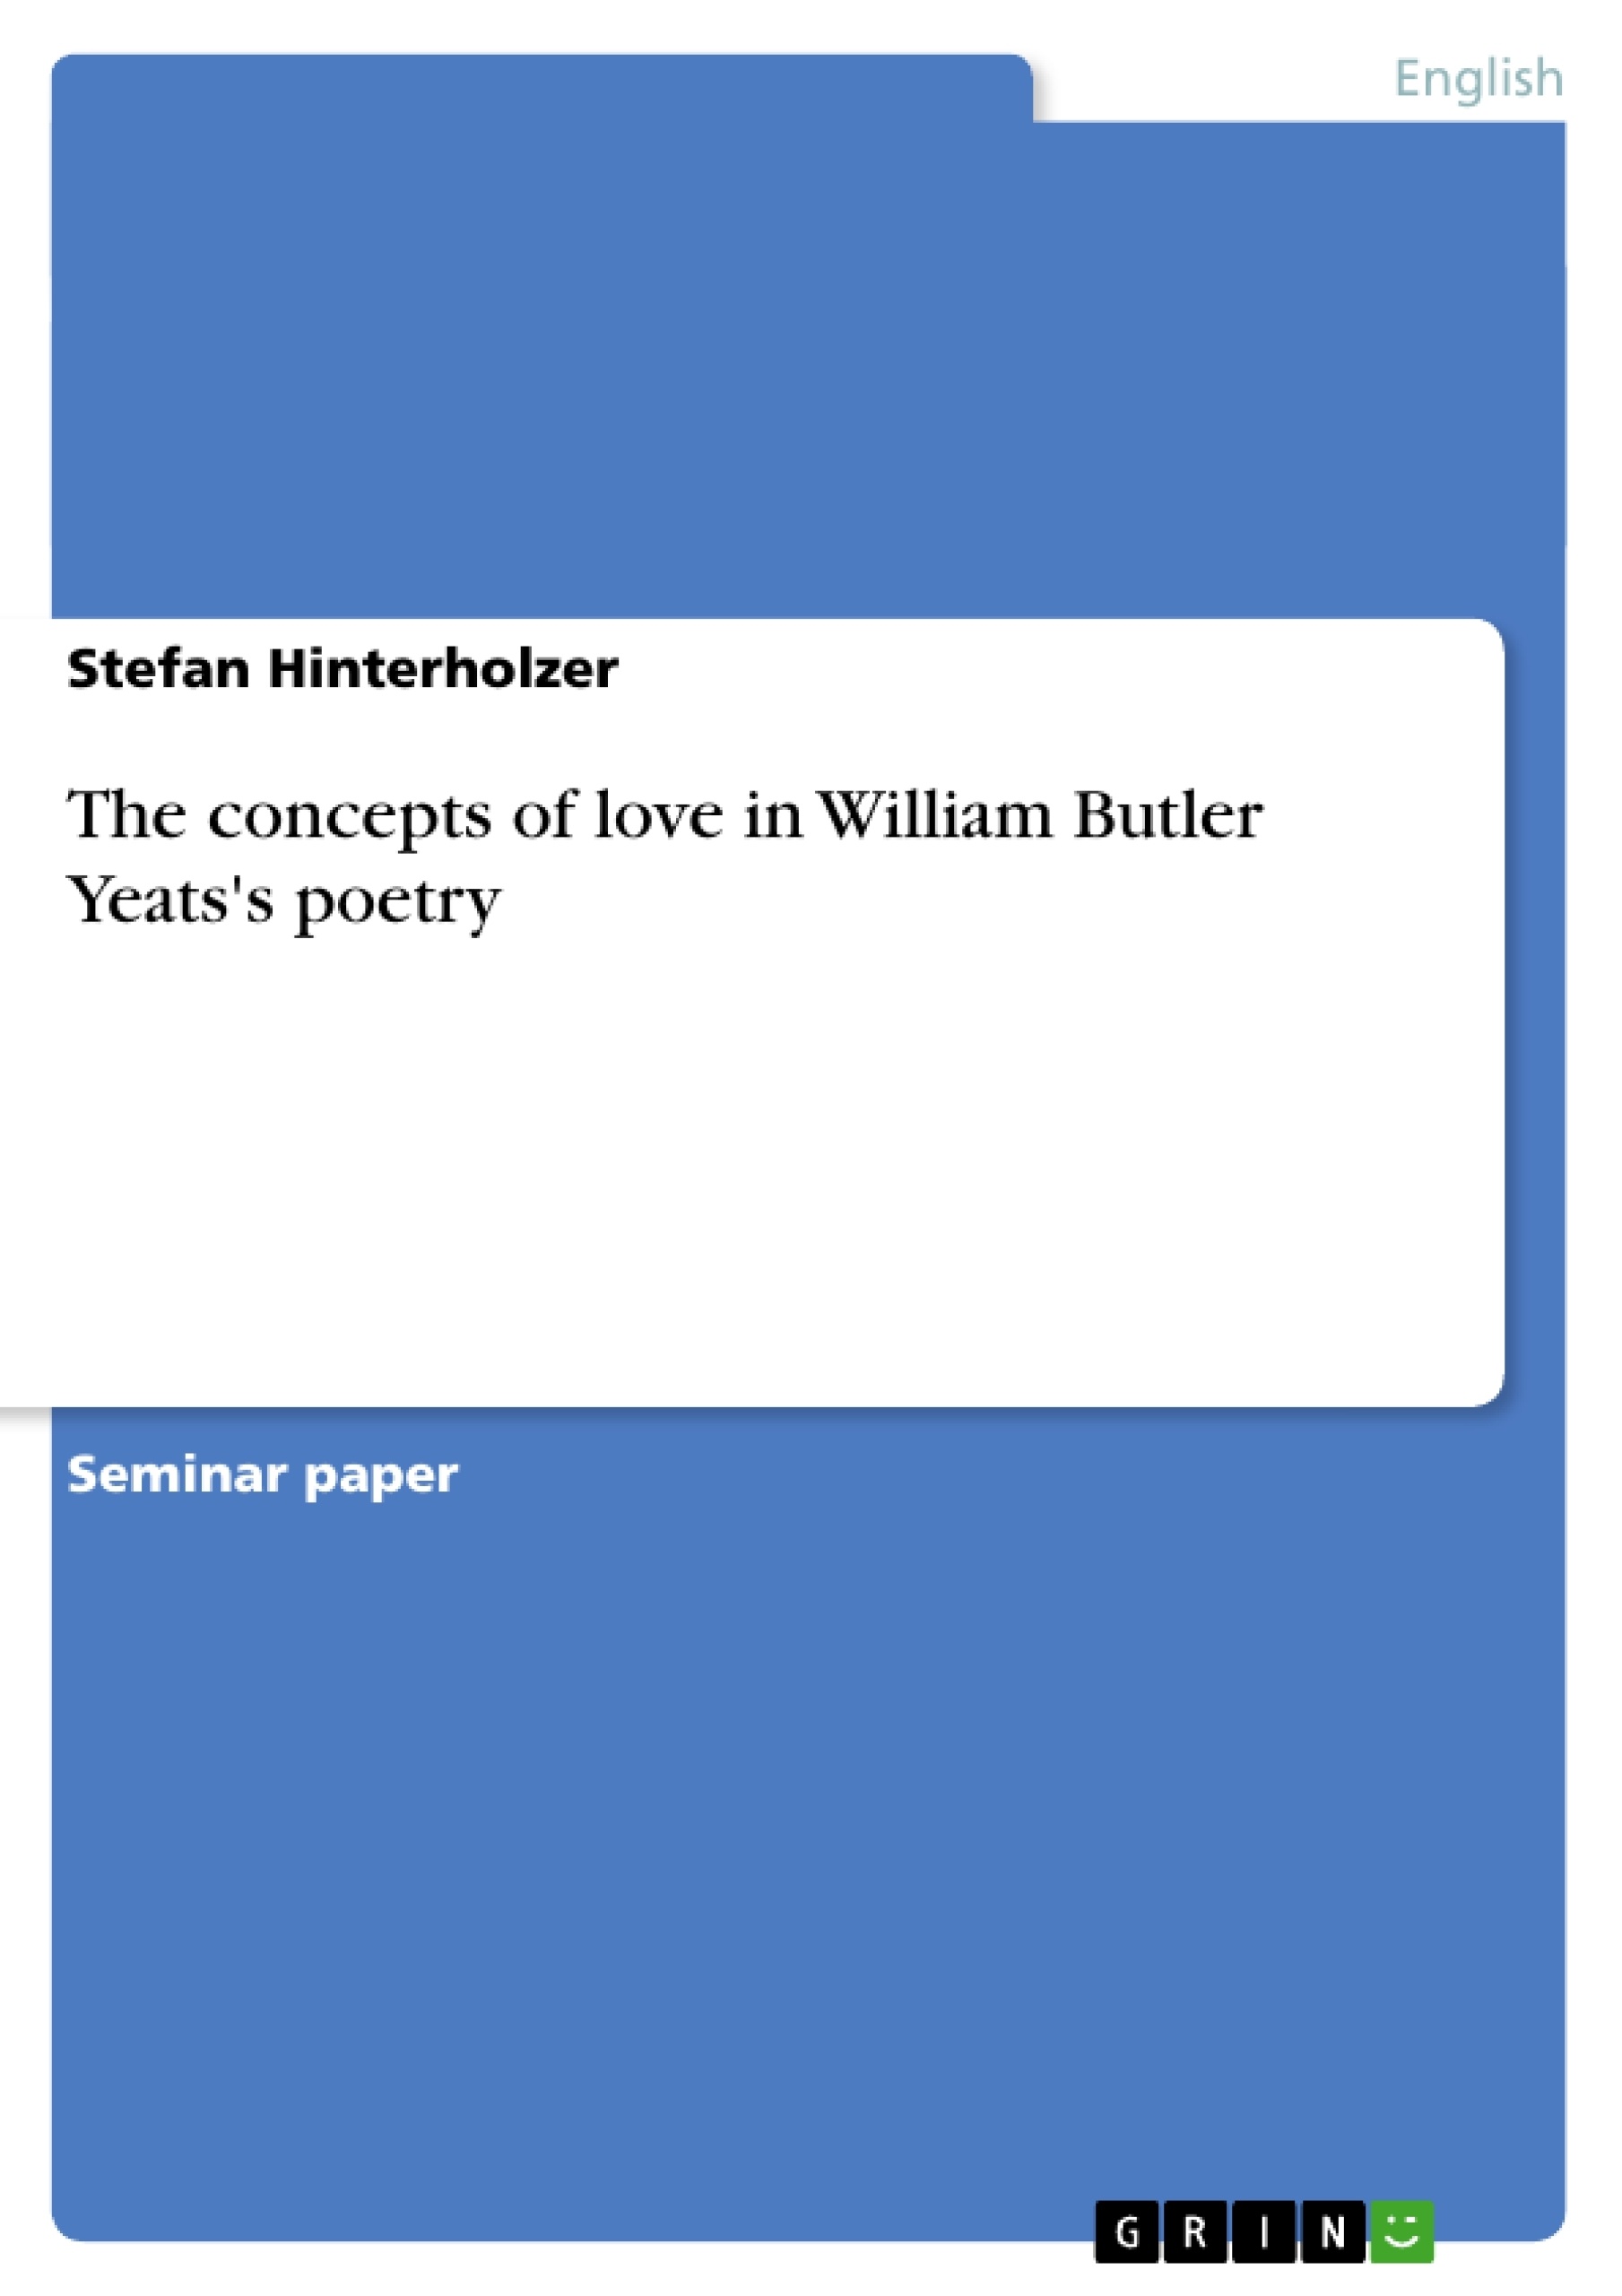 Title: The concepts of love in William Butler Yeats's poetry